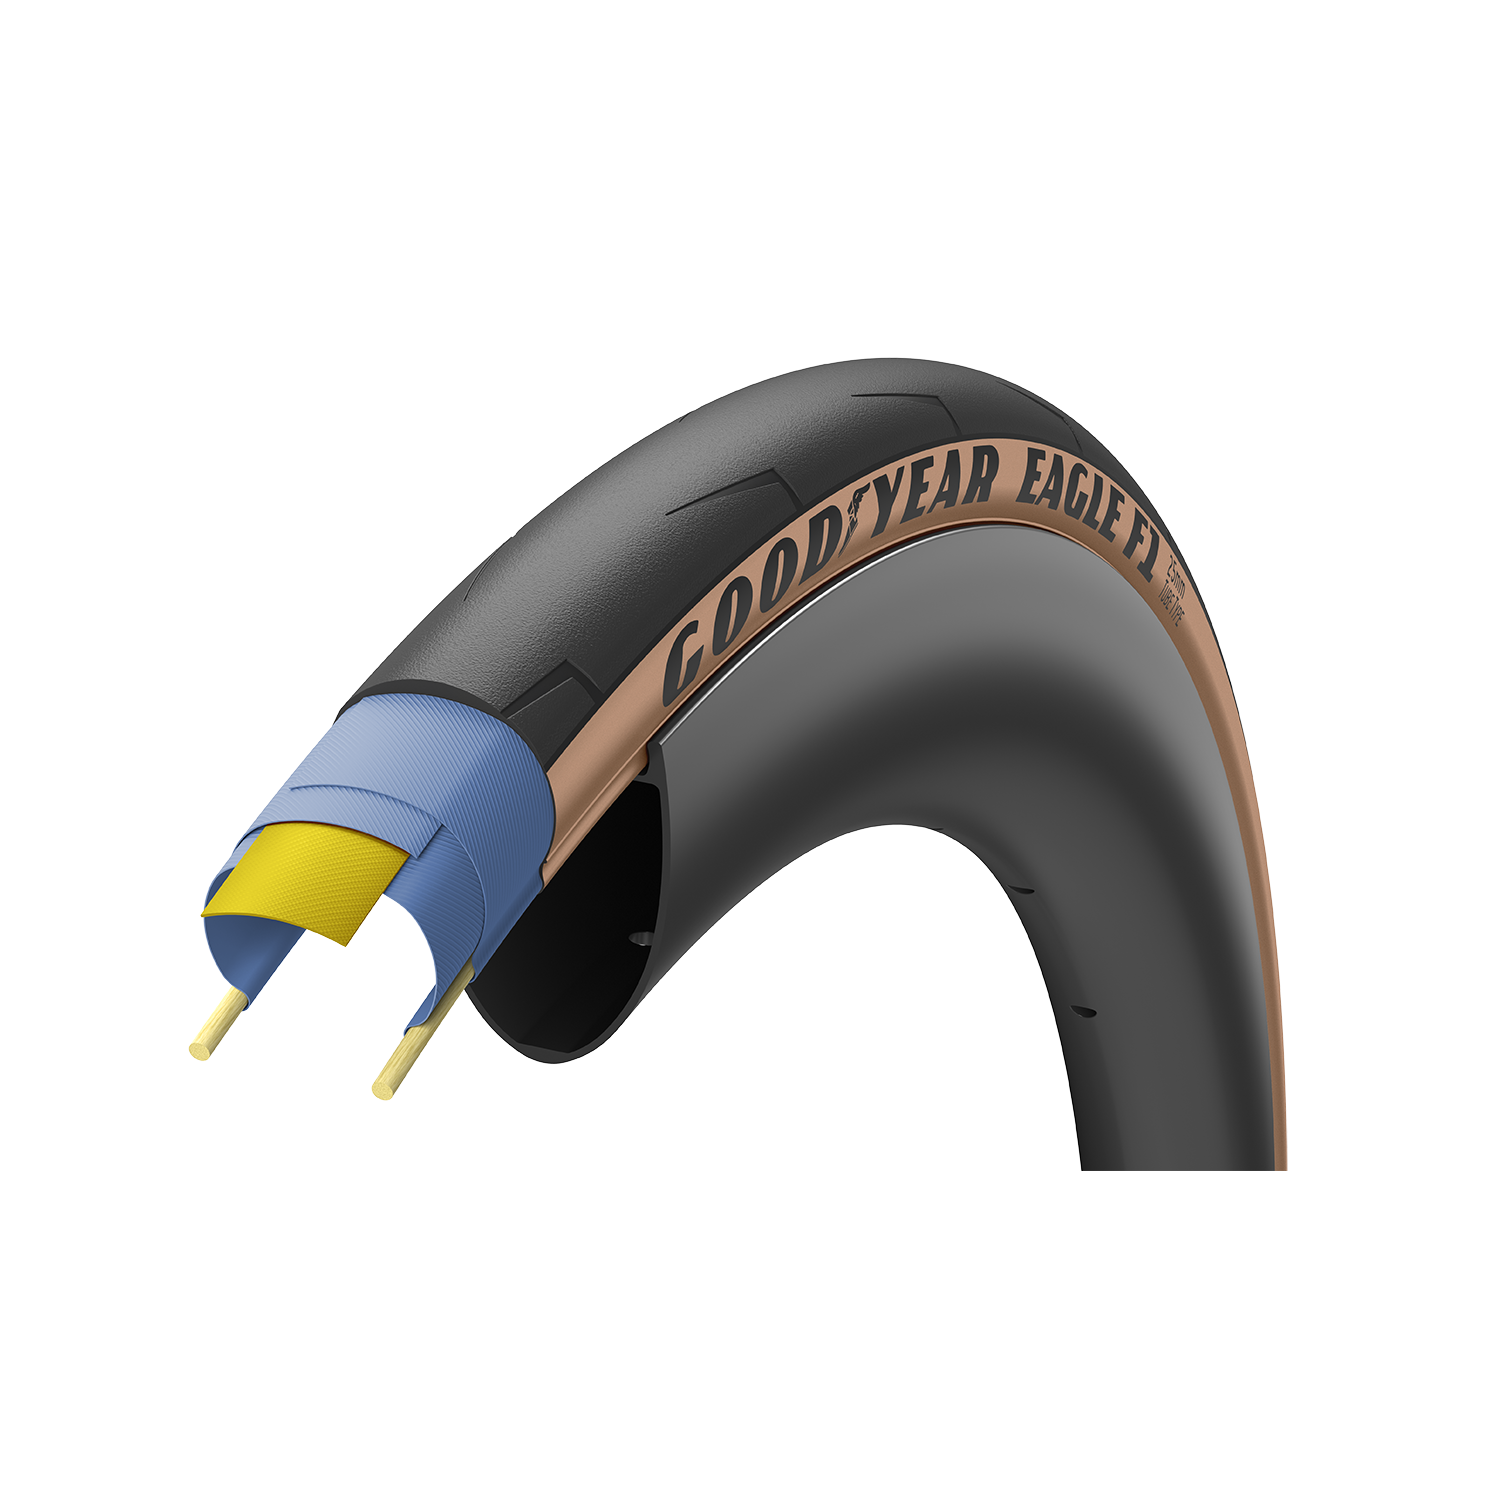 Goodyear Eagle F1 Clincher Tyre - Tube Type - Tan